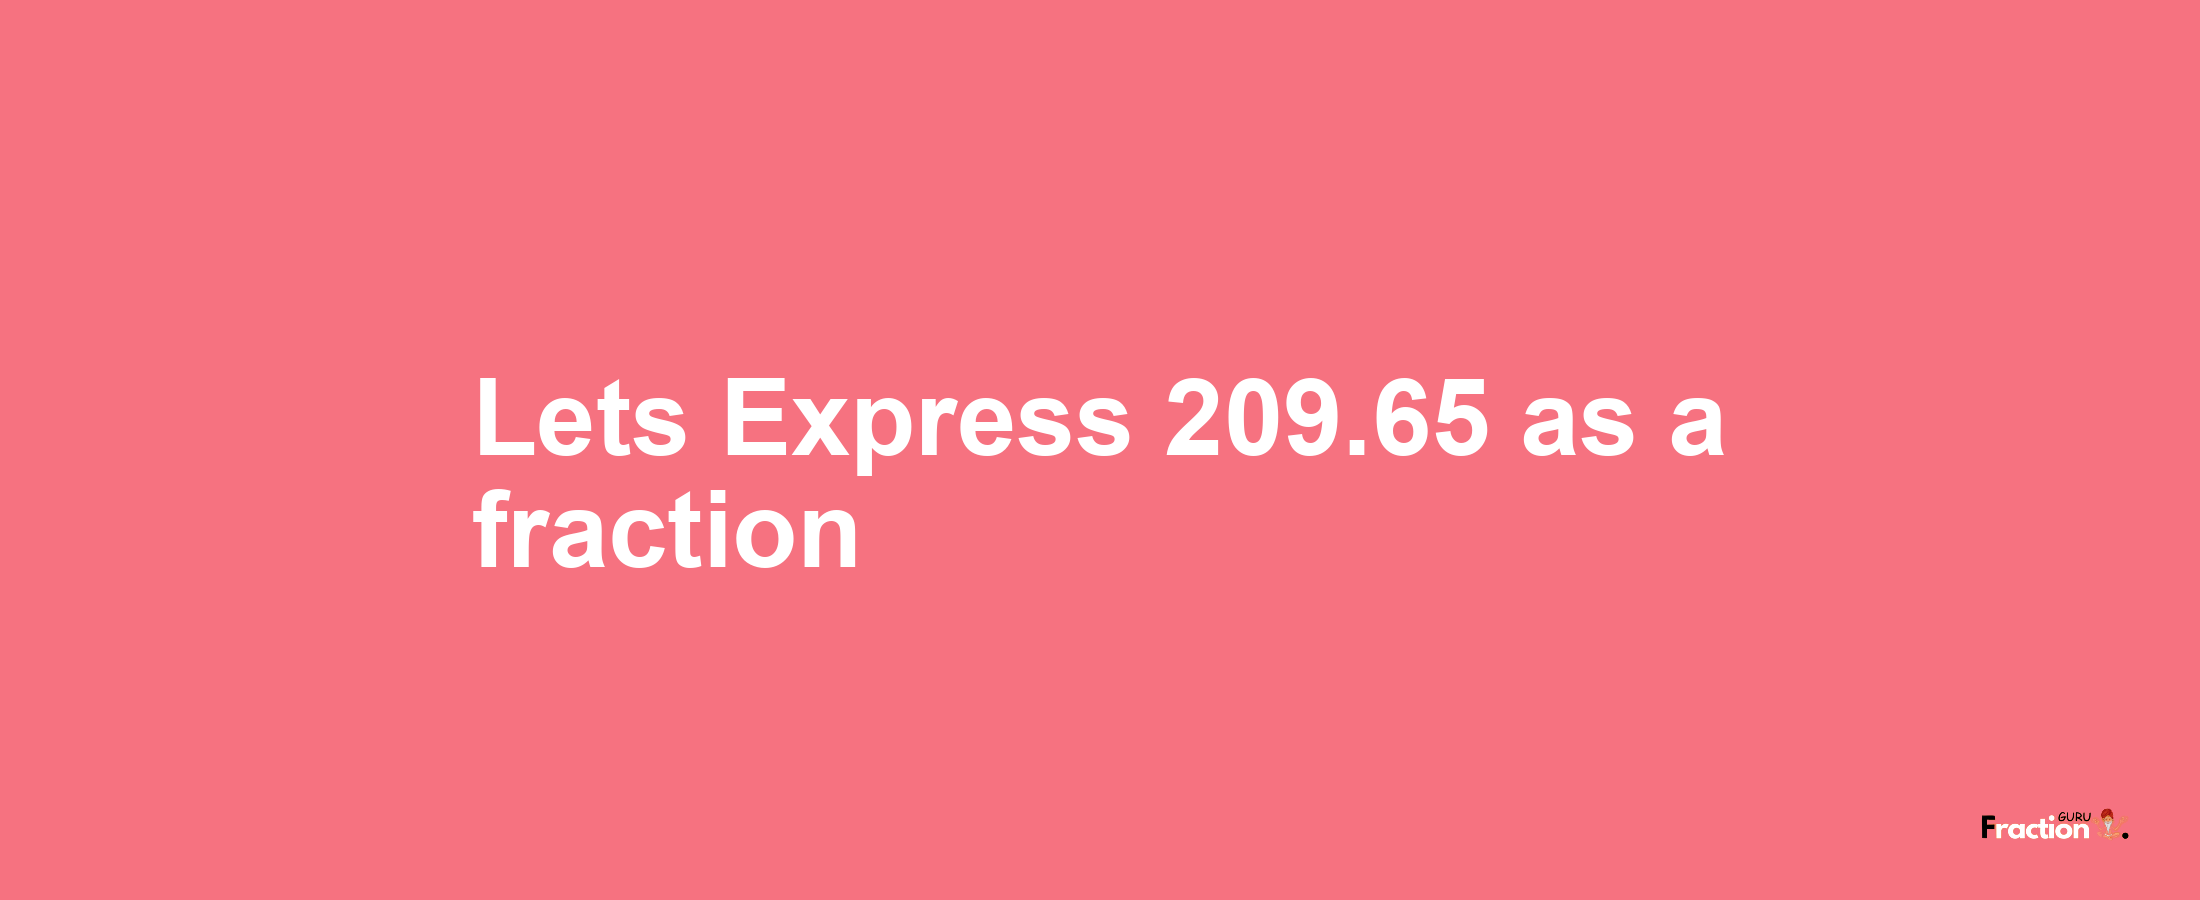 Lets Express 209.65 as afraction